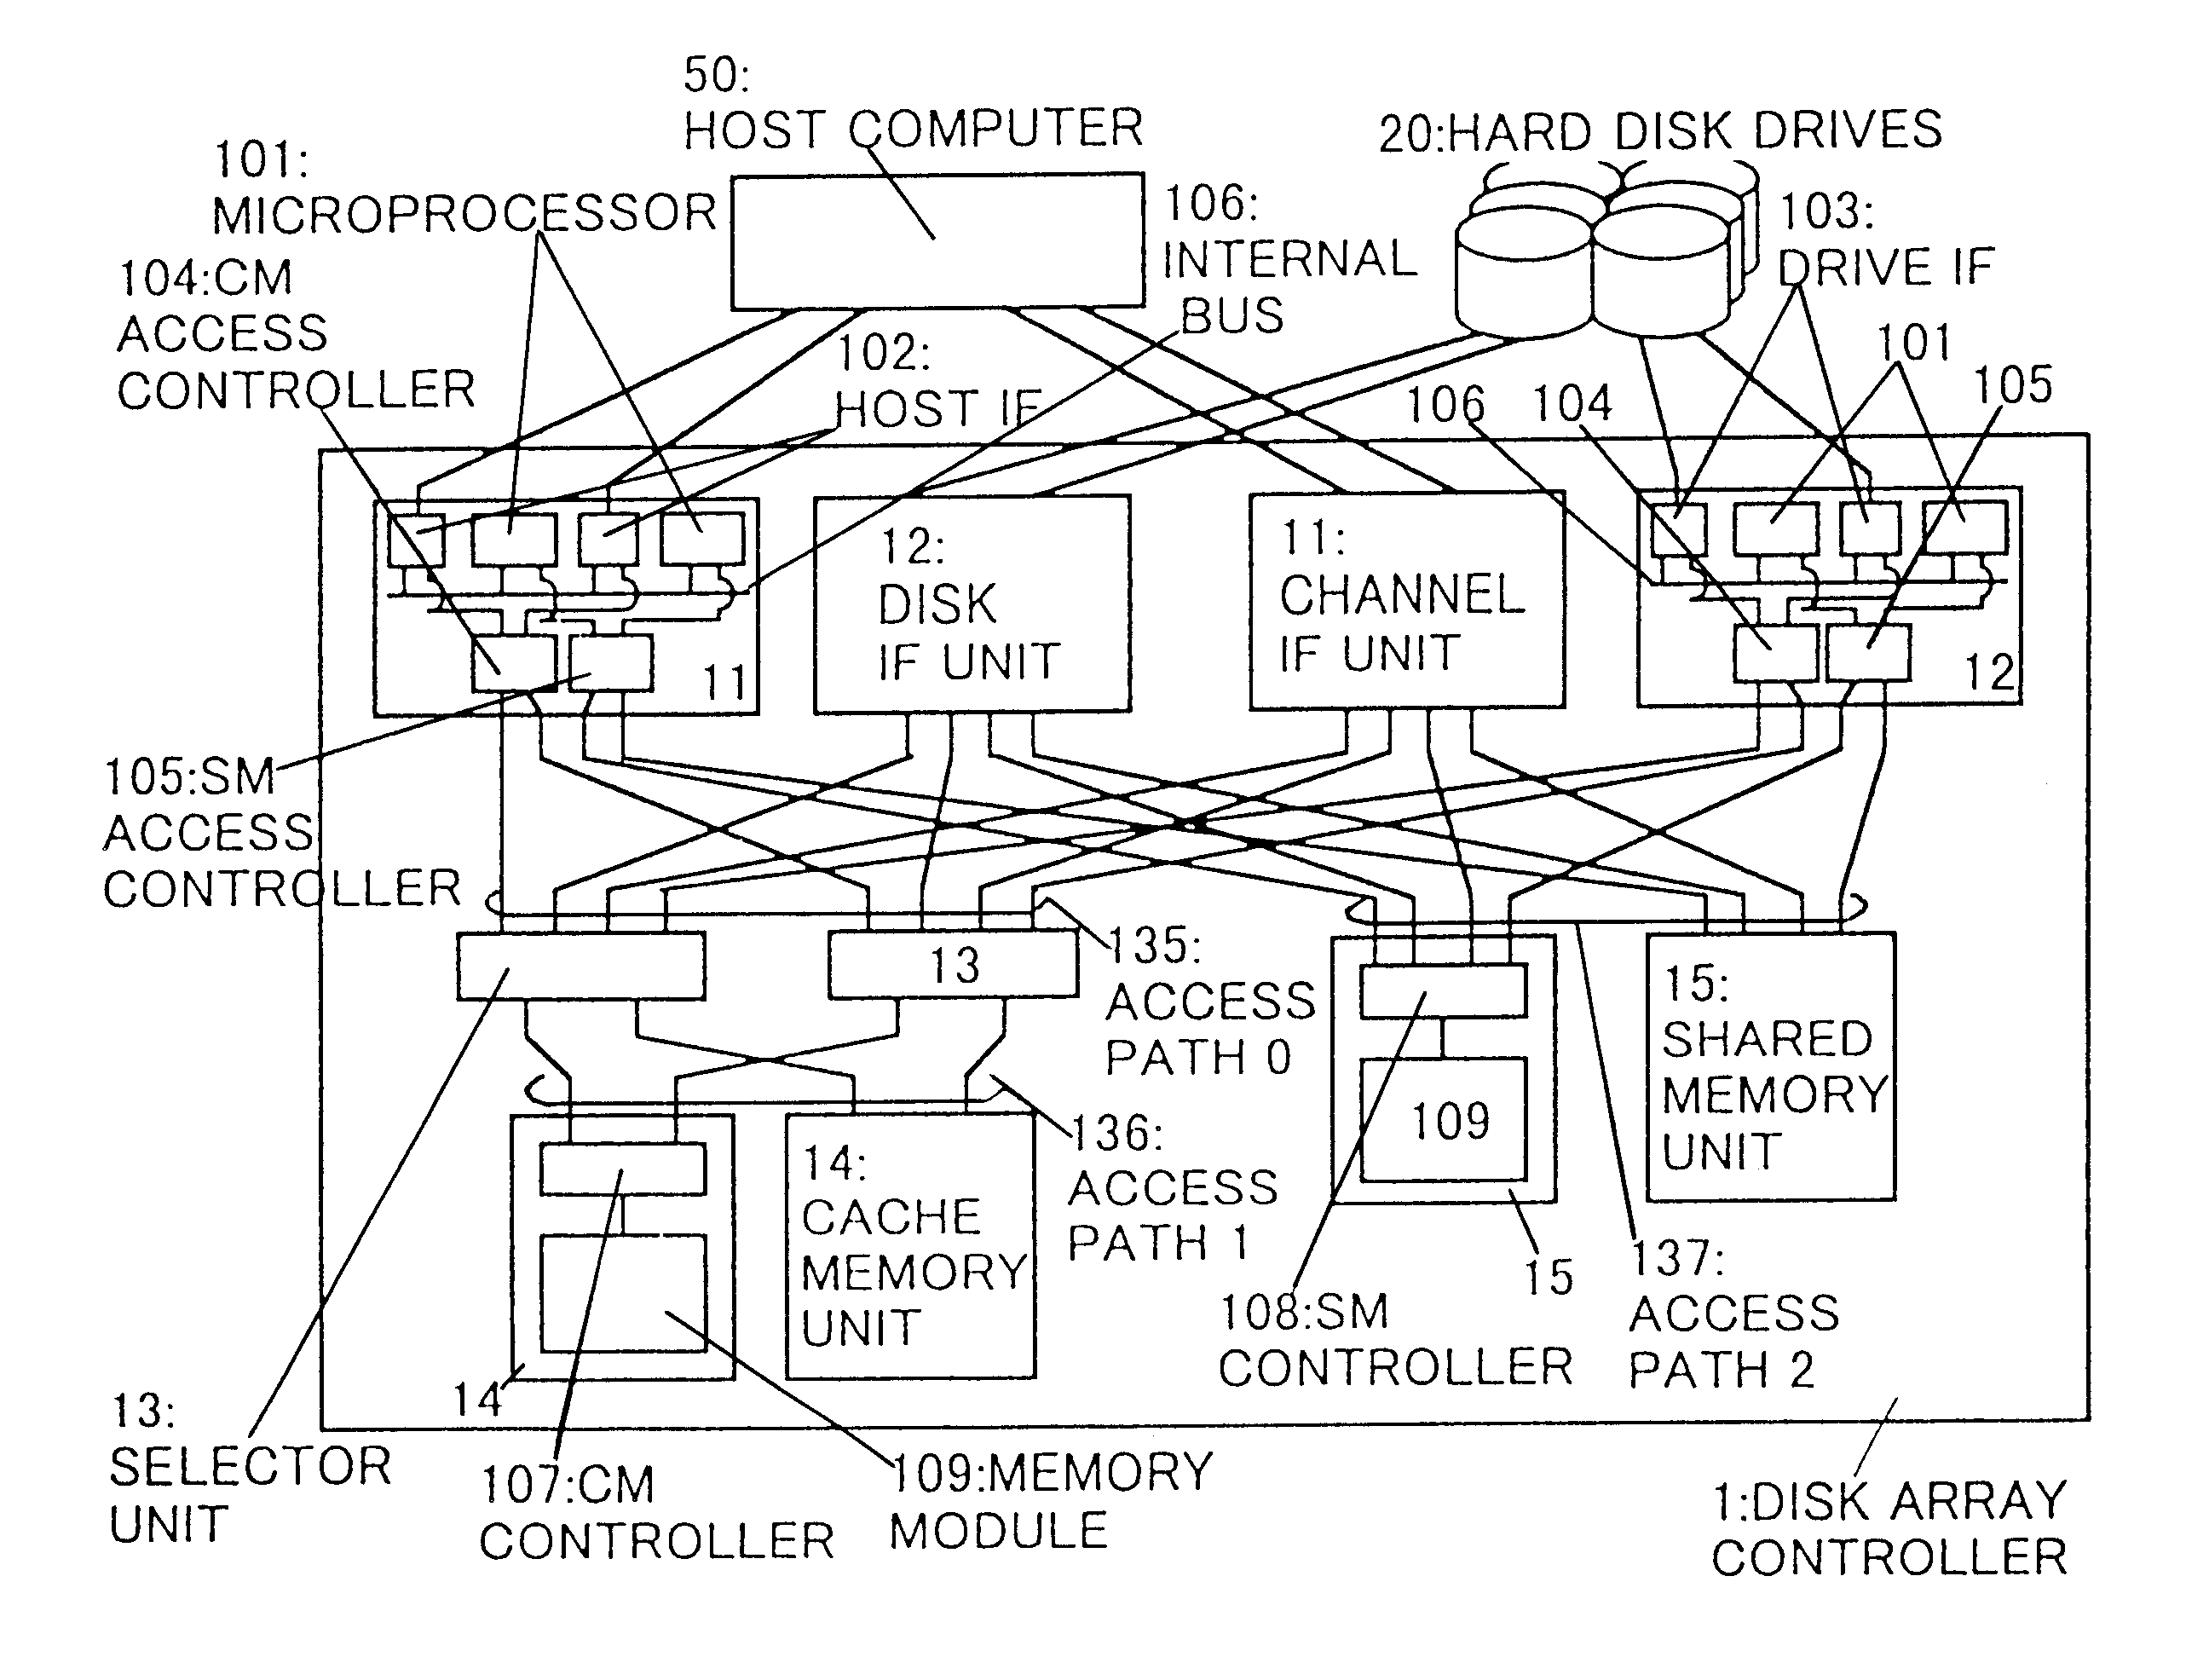 Disk array control device with two different internal connection systems